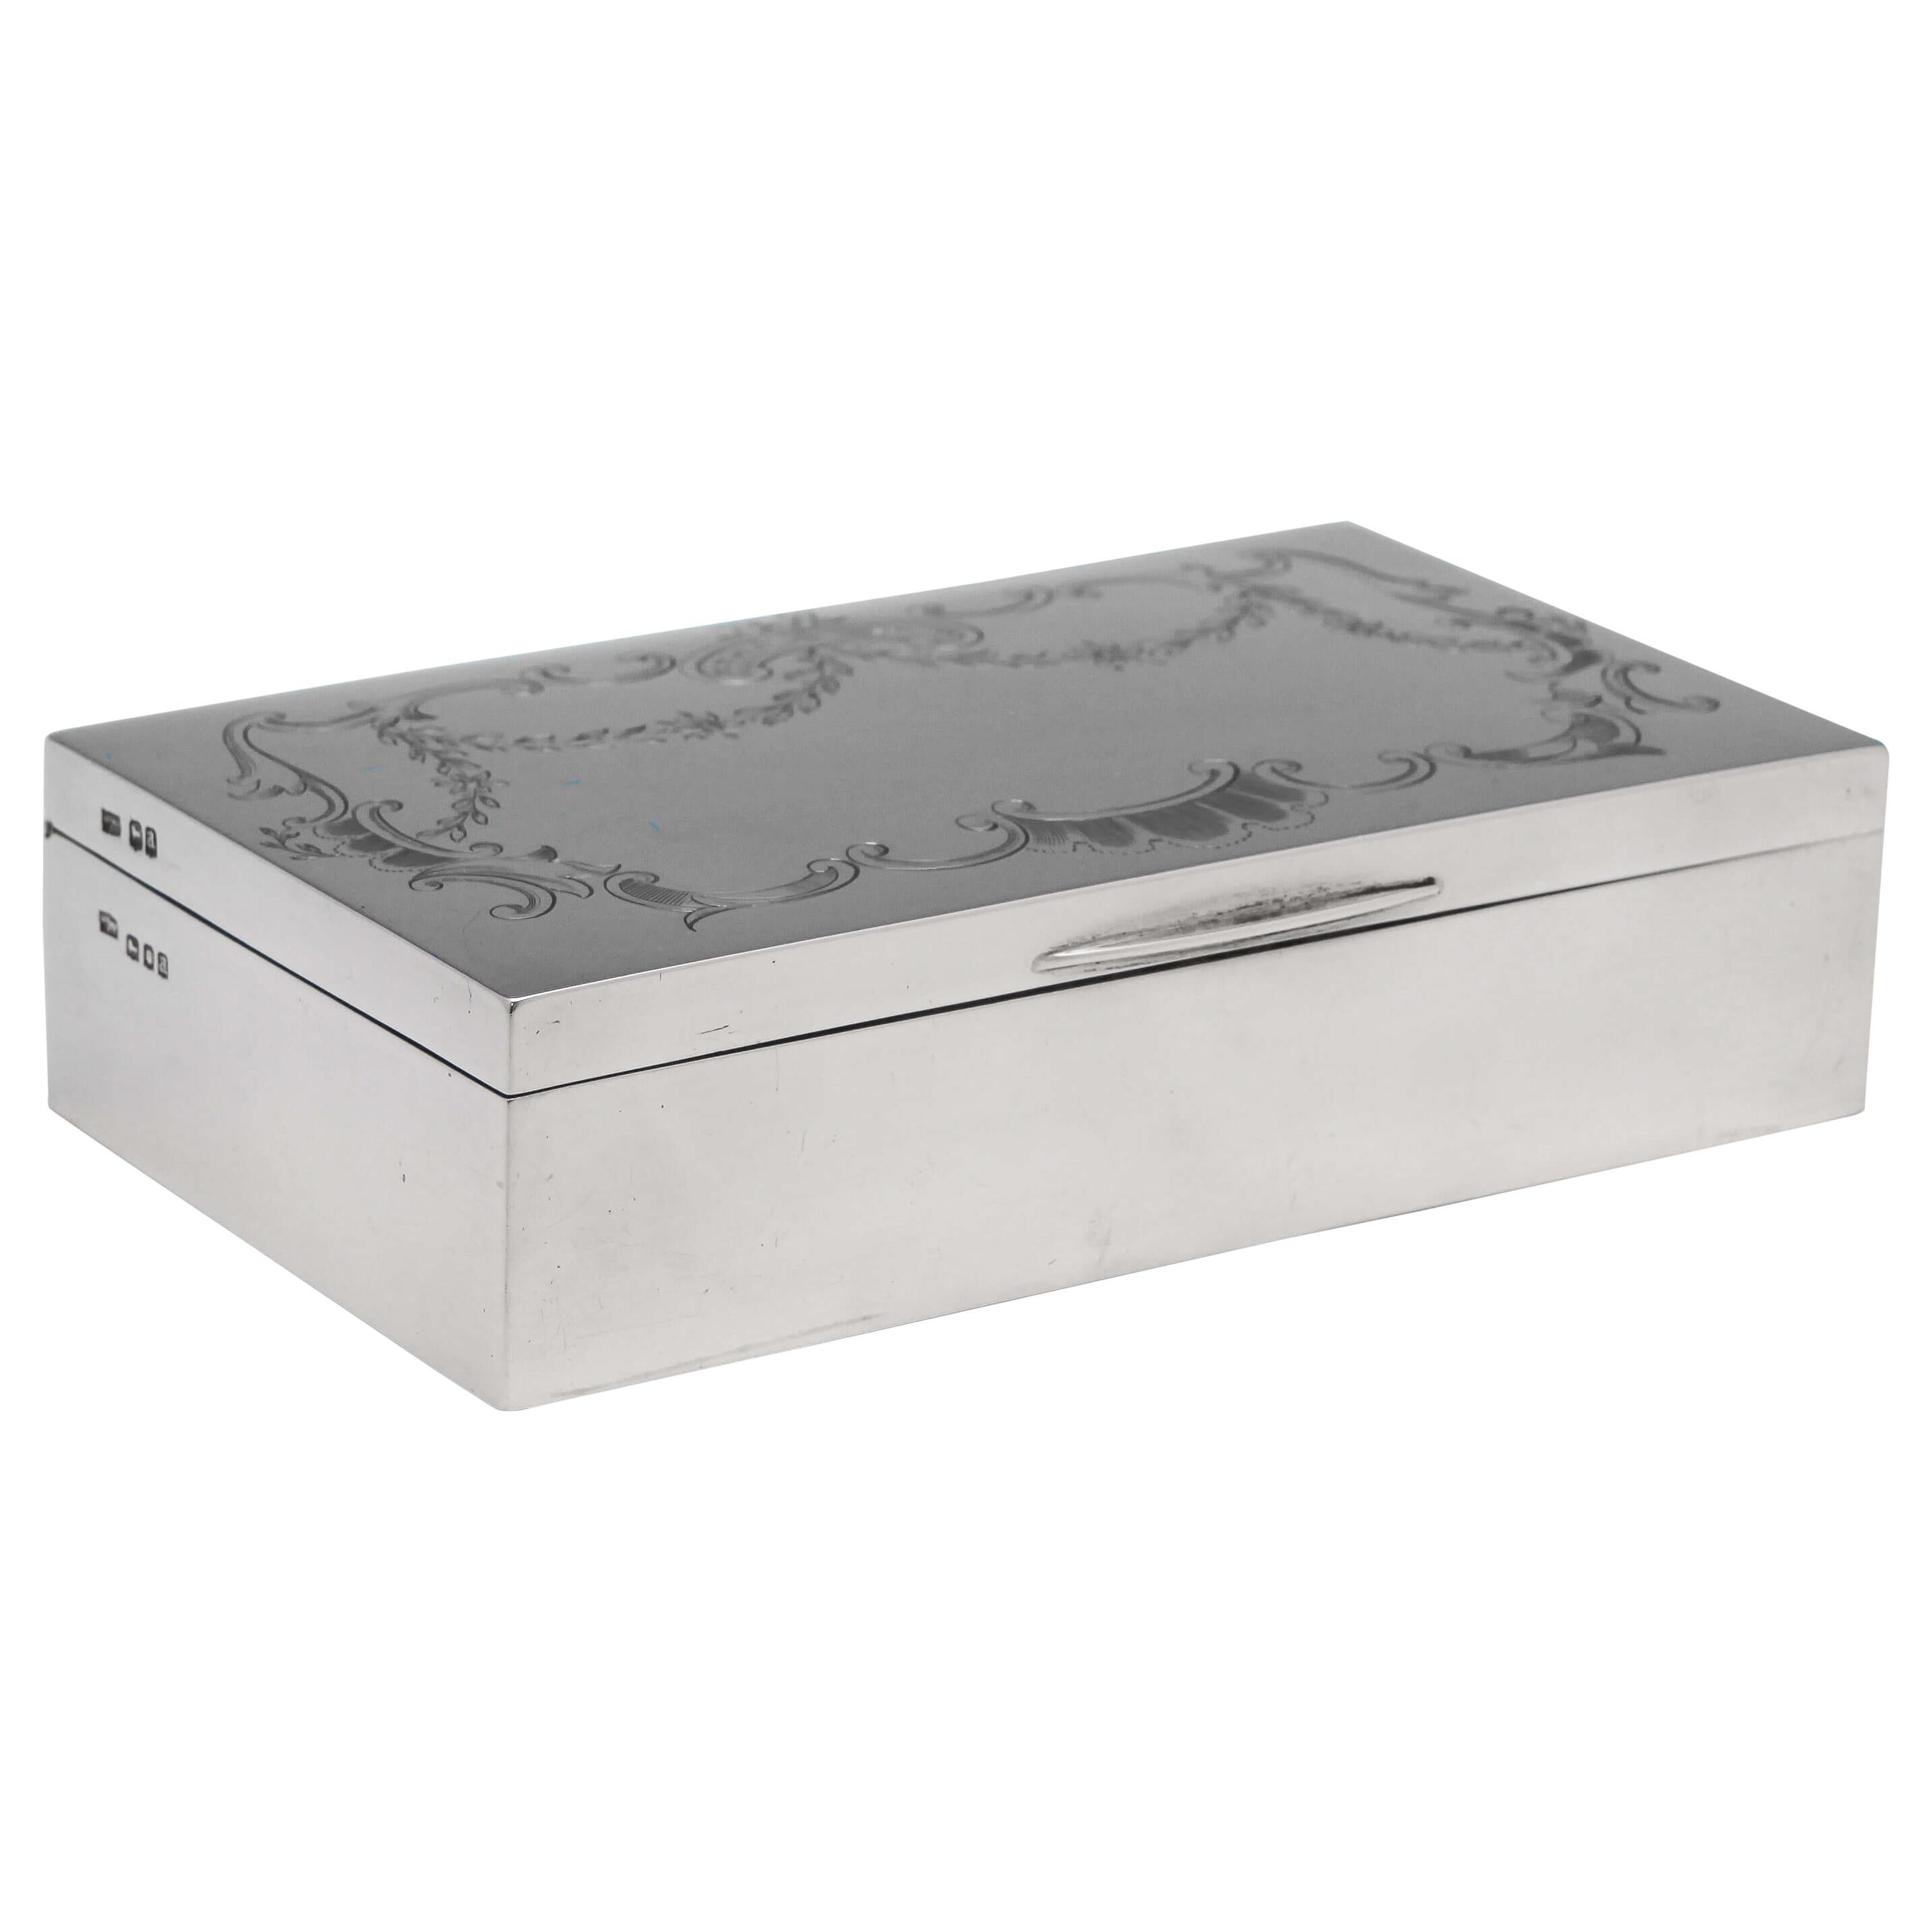 George V Antique Engraved Sterling Silver Jewellery Box by Mappin & Webb in 1916